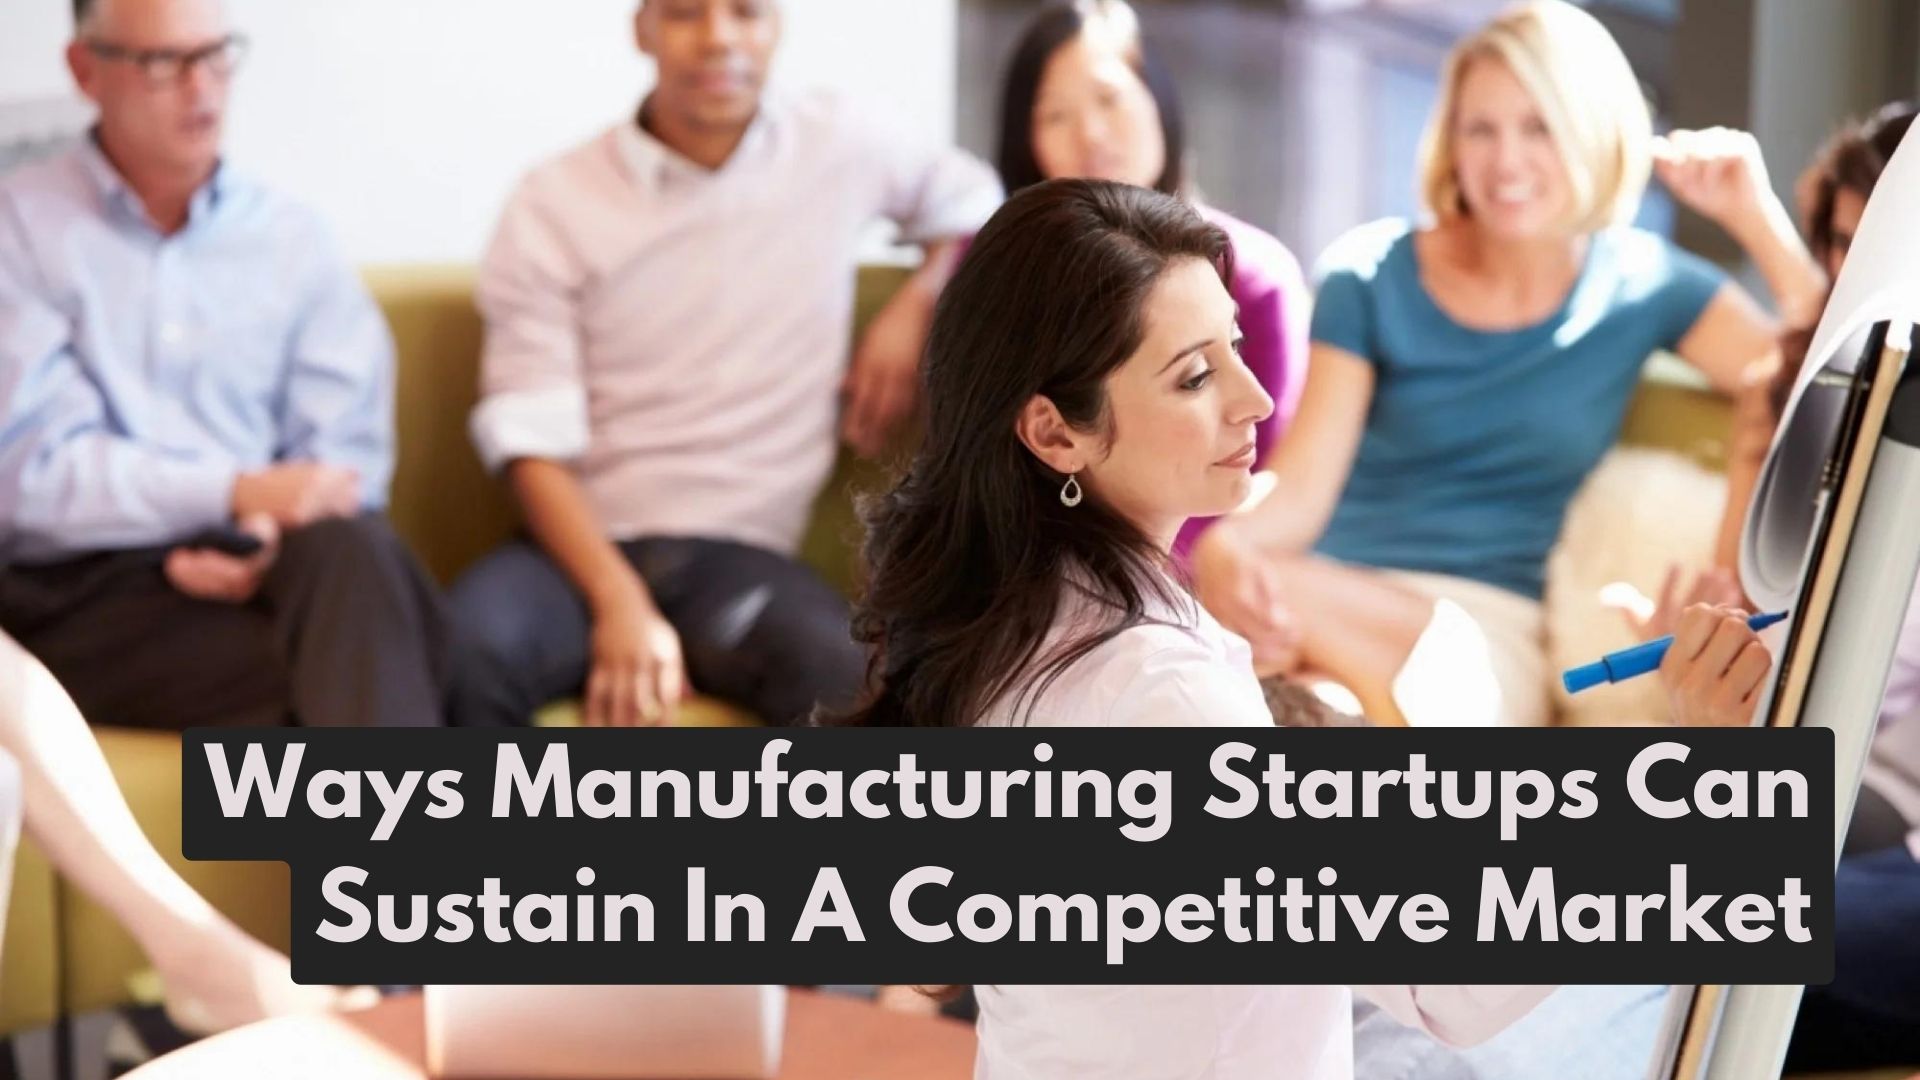 7 Ways Manufacturing Startups Can Sustain In A Competitive Market